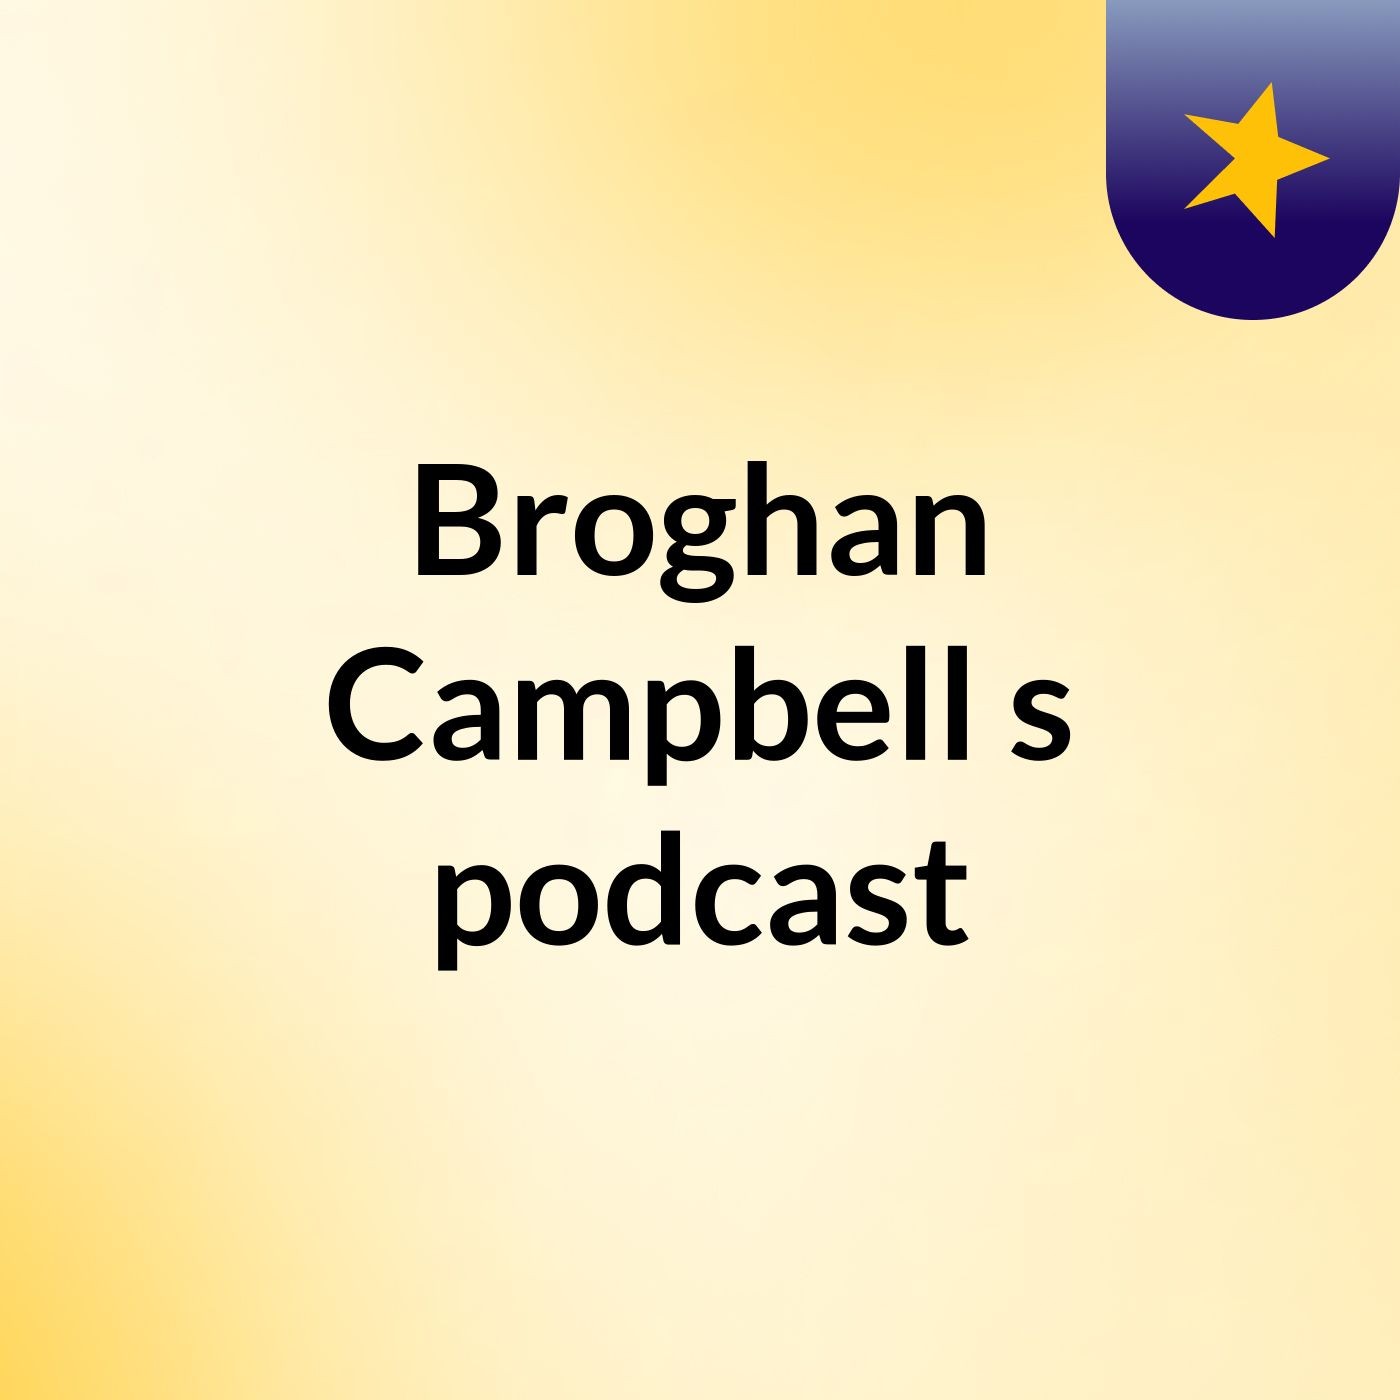 Episode 3 - Broghan Campbell's podcast